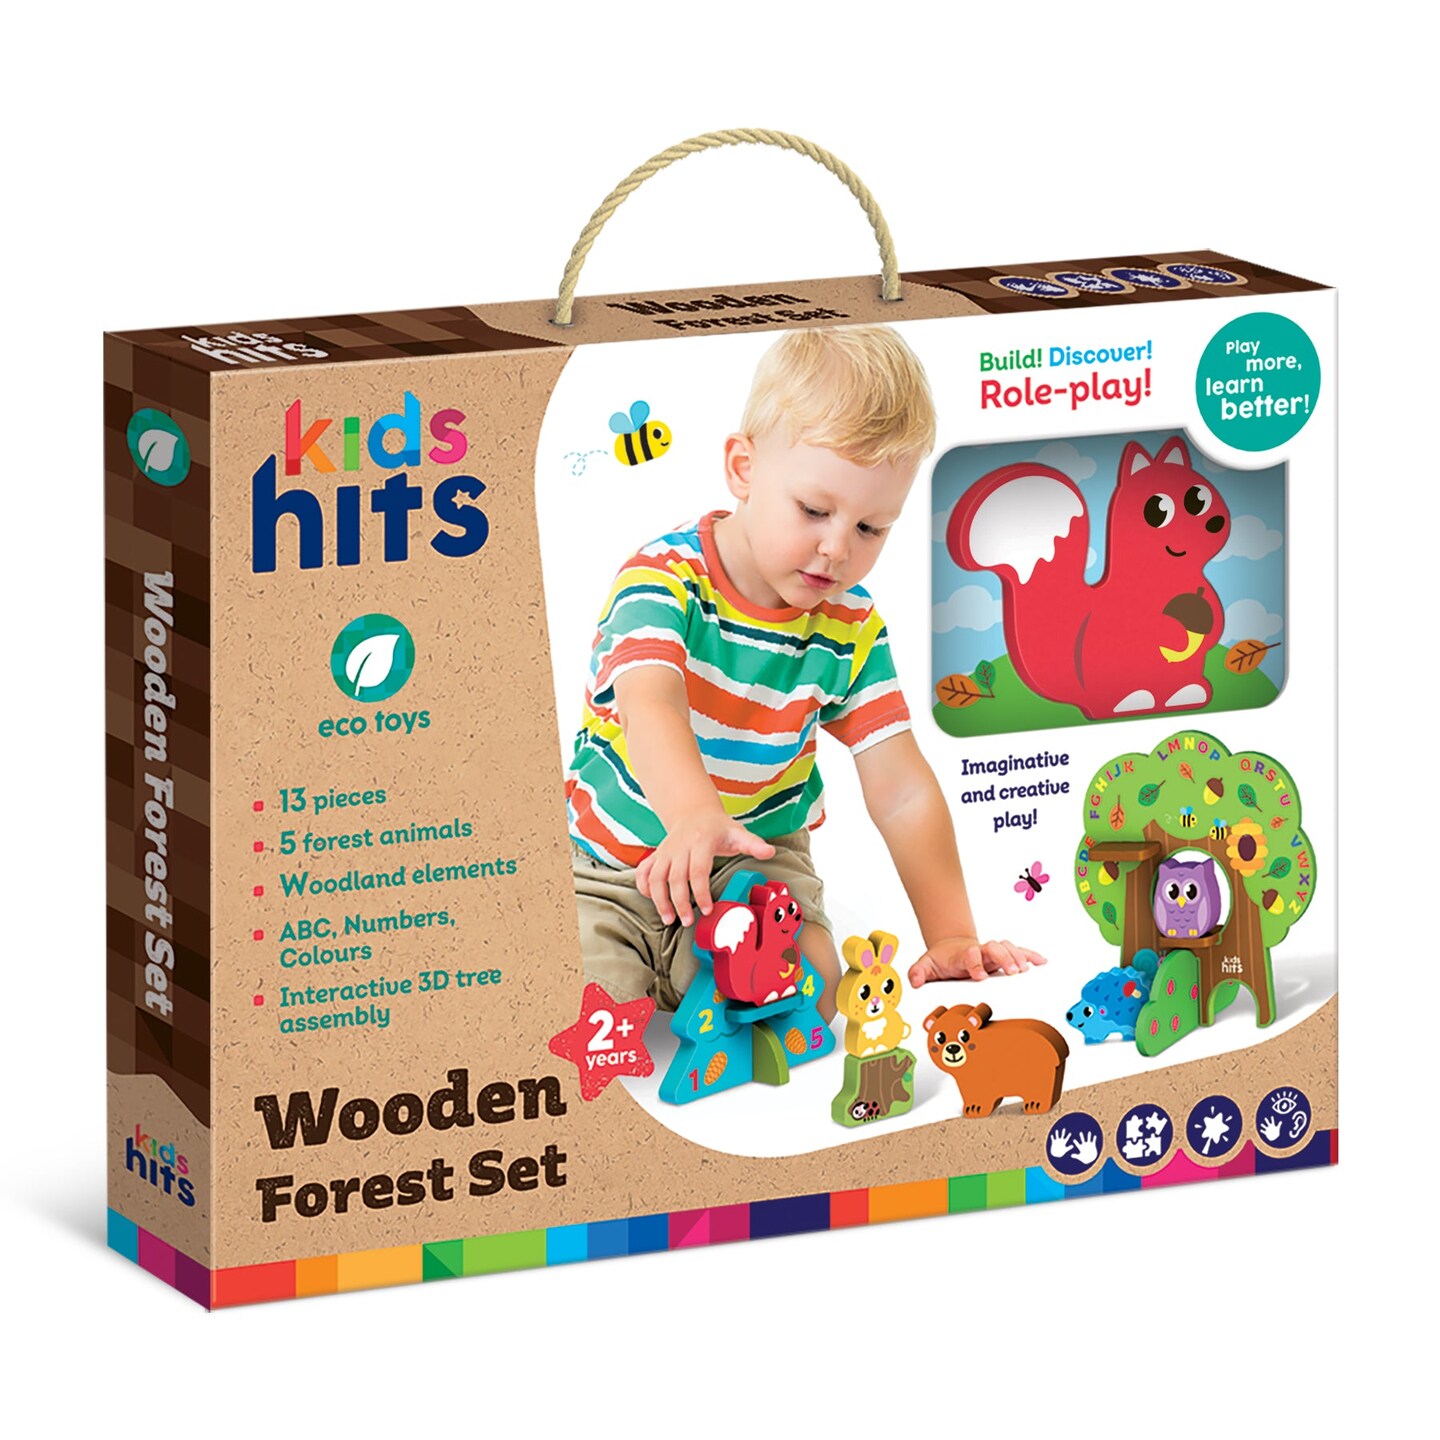 Wooden Forest SetKids Hits: Unleash Creativity with the Wooden Forest Set - Building, Matching, and Imaginative Play for Little Explorers!